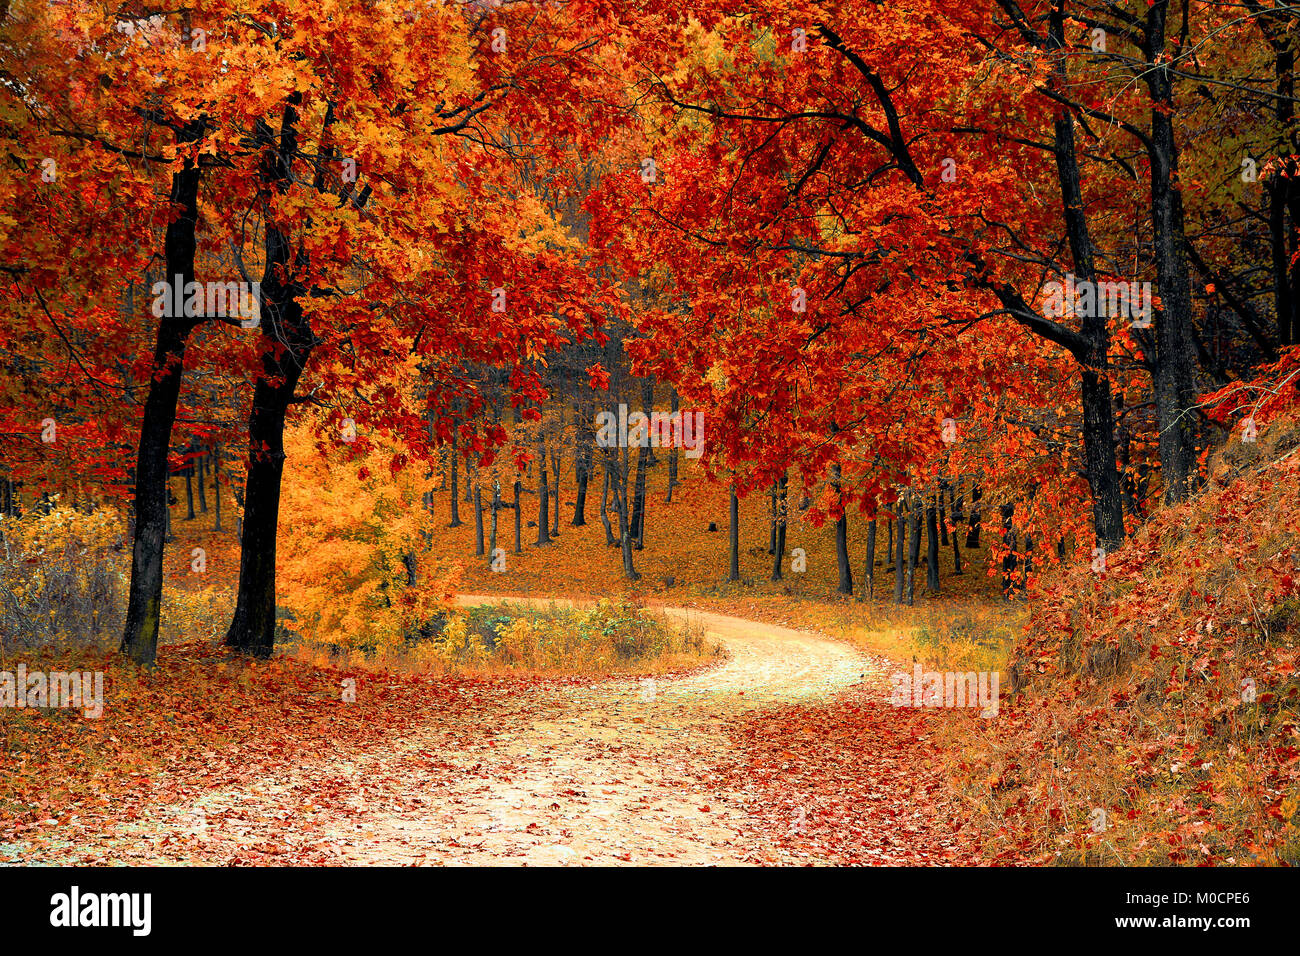 Walk On The Autumn Forest Road Romanian Forest Trees Stock Photo Alamy